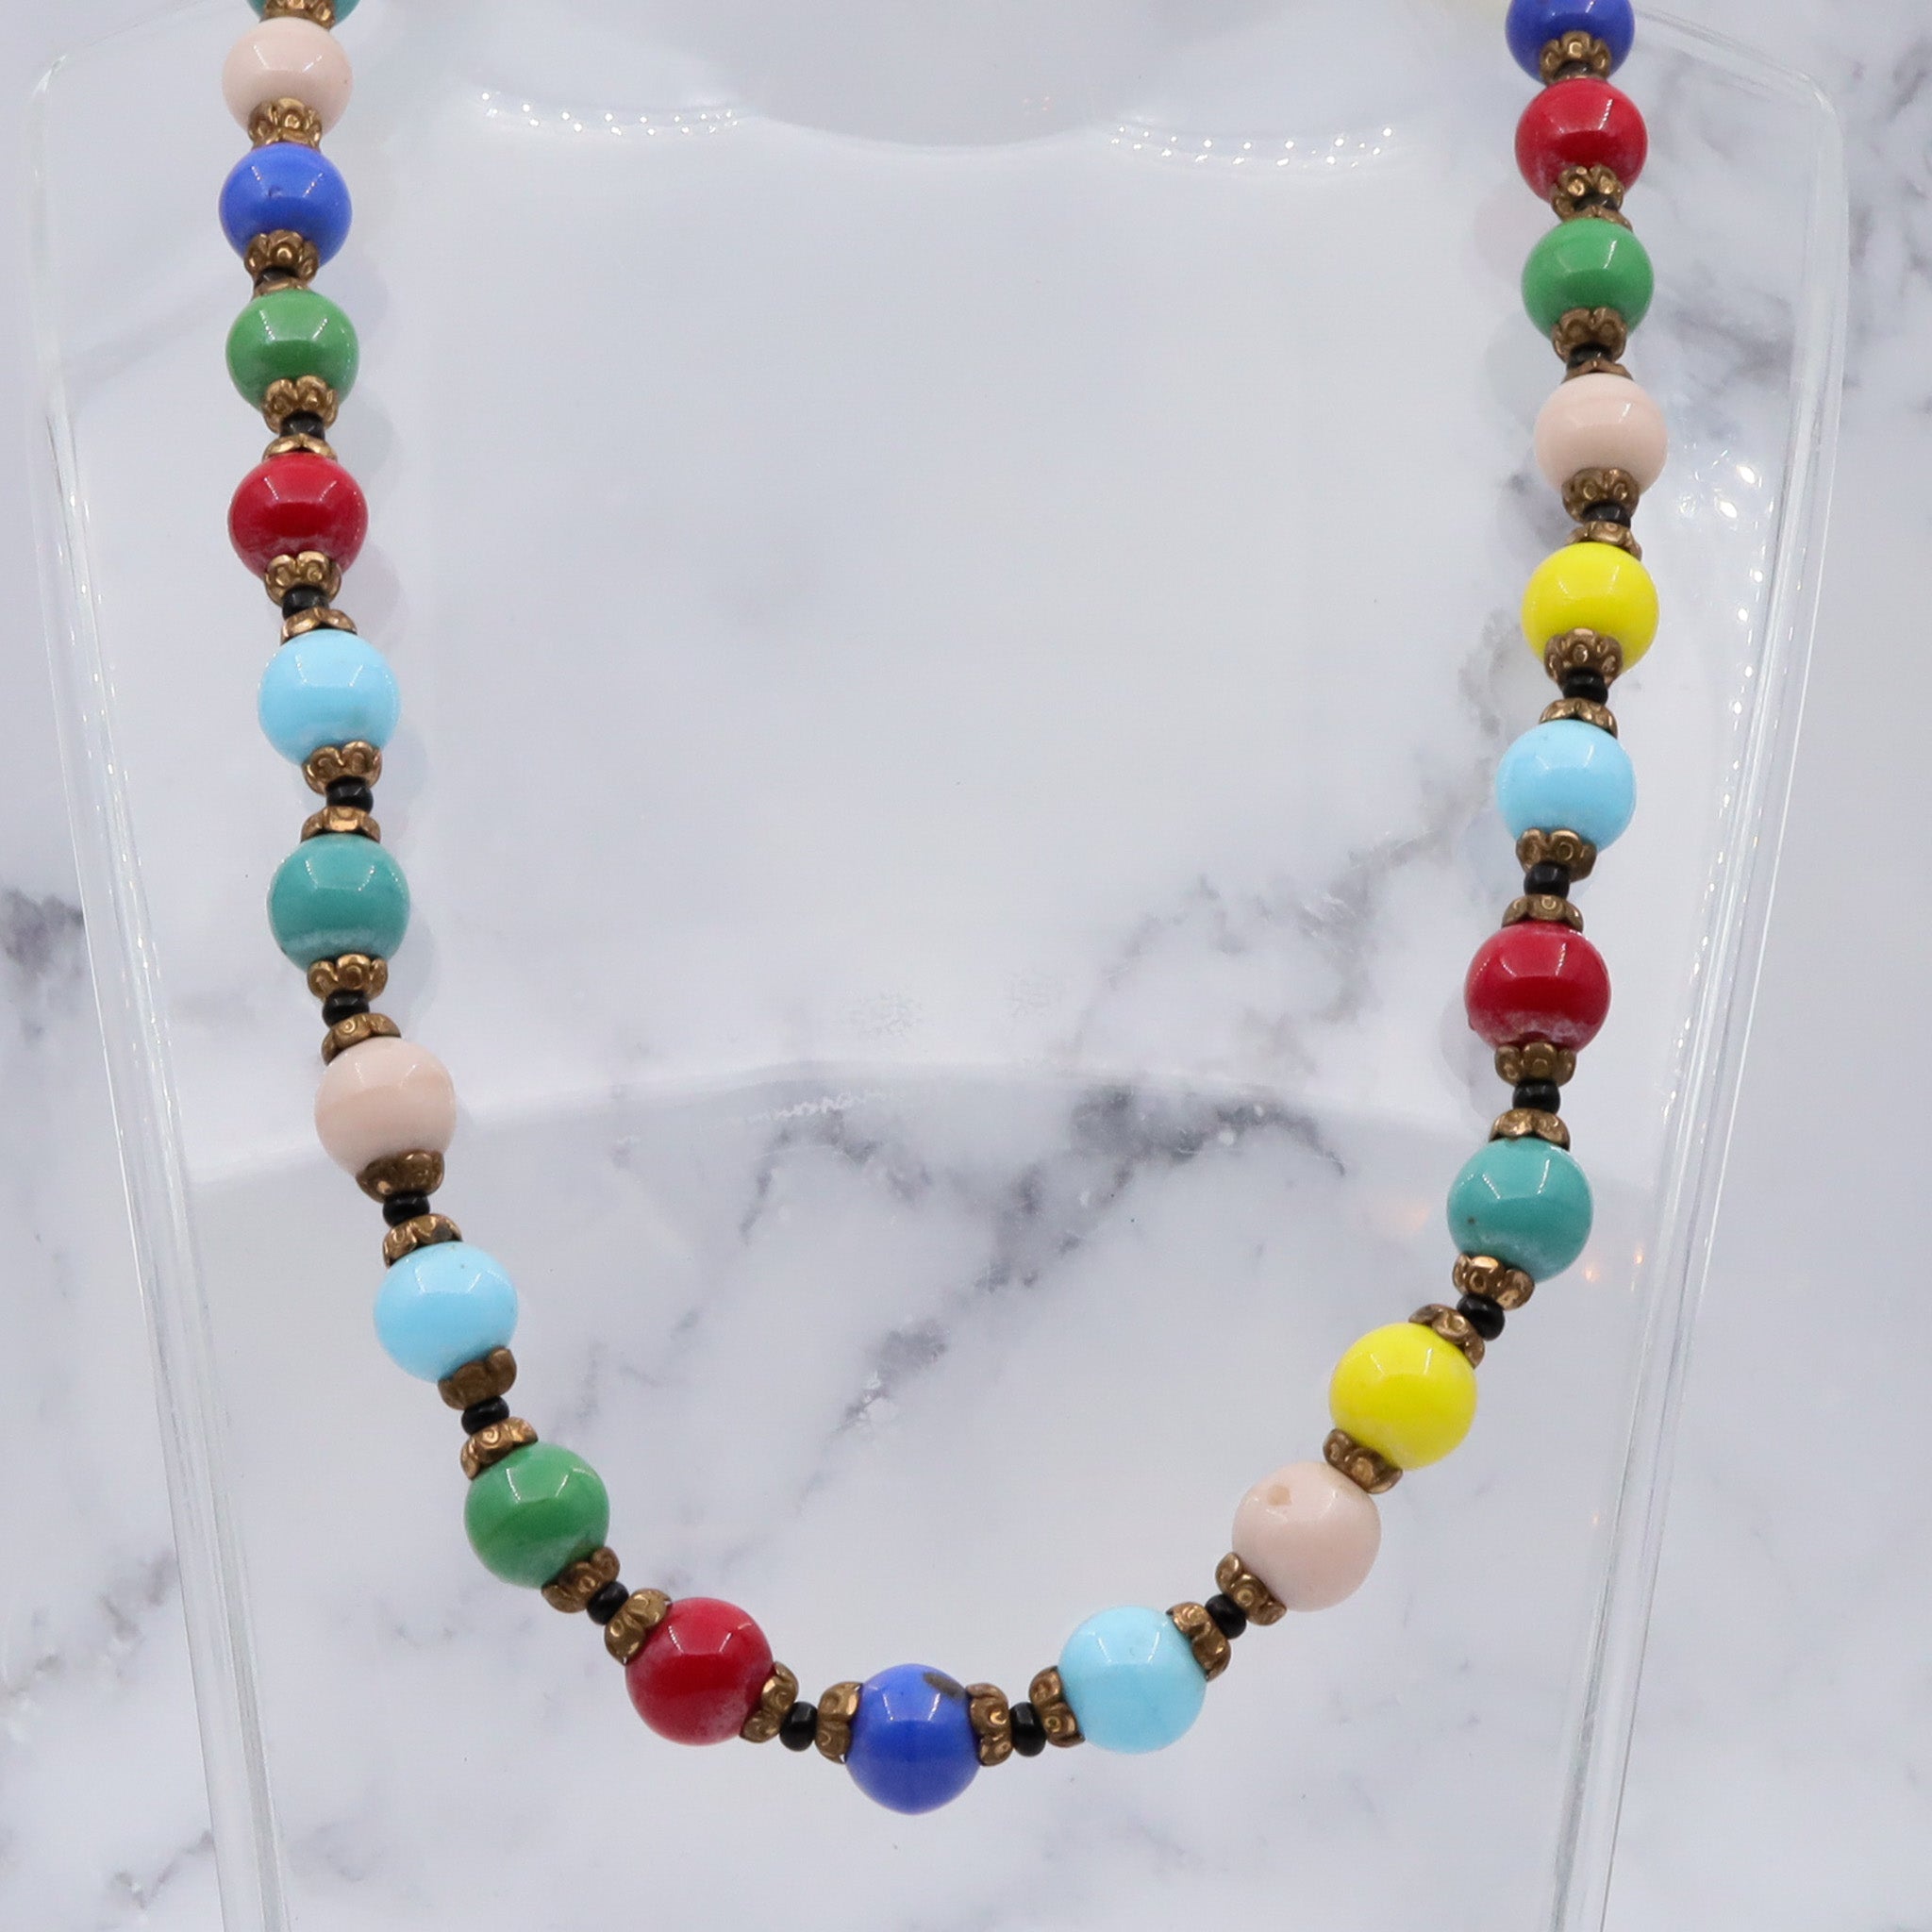 Antique rainbow glass beaded necklace with brass spacers, 16.5